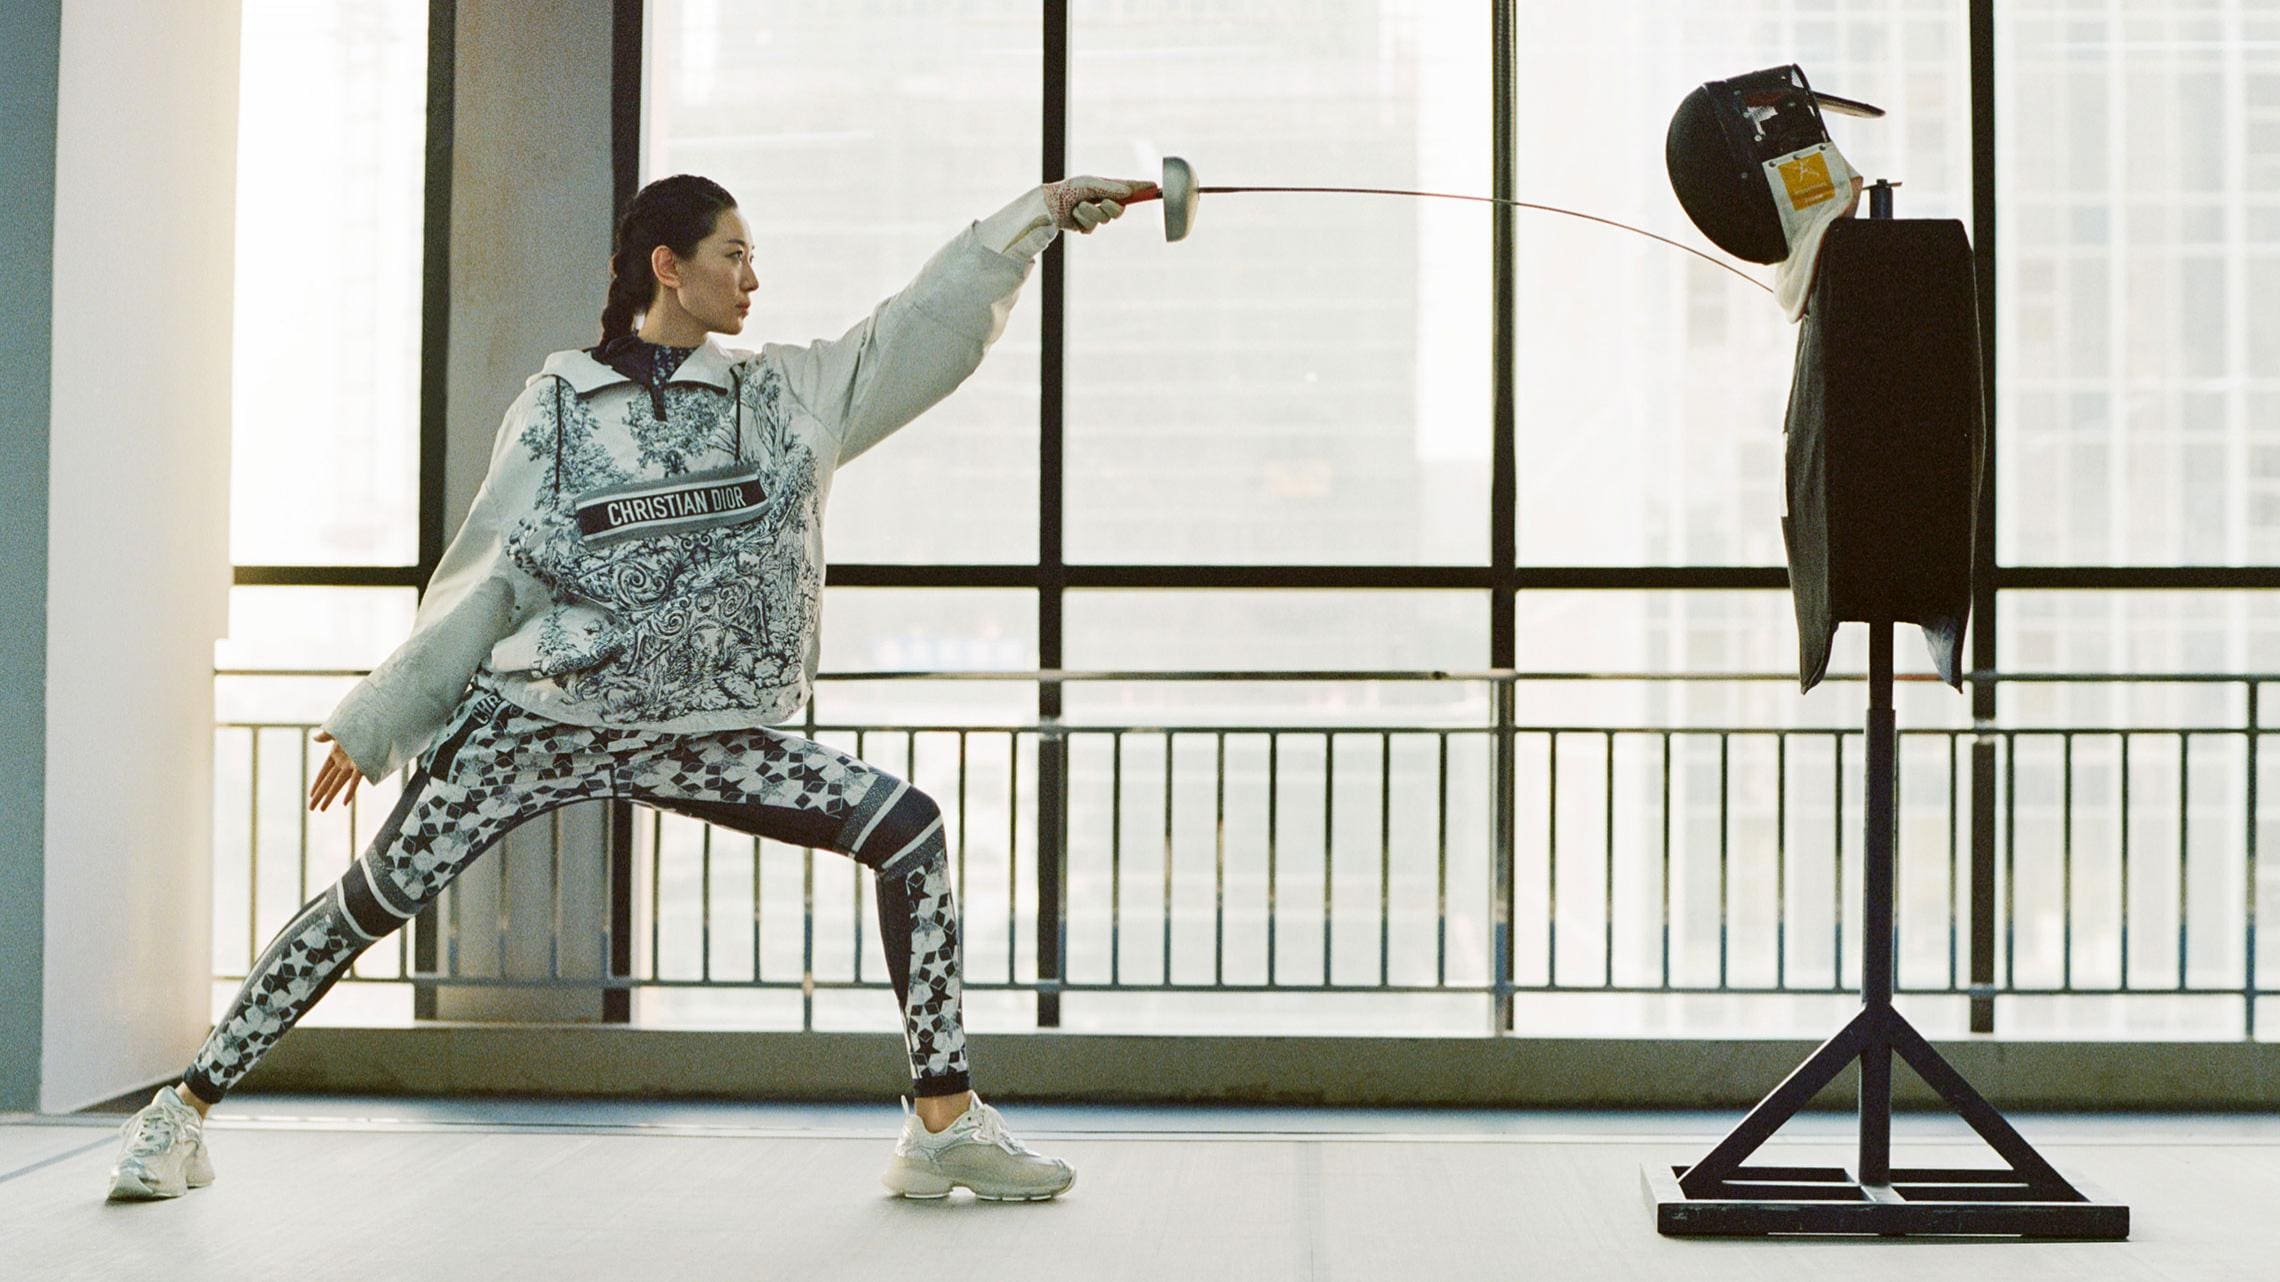 Dior x Technogym is the collaboration you didn't know your workout needed –  Luxury London